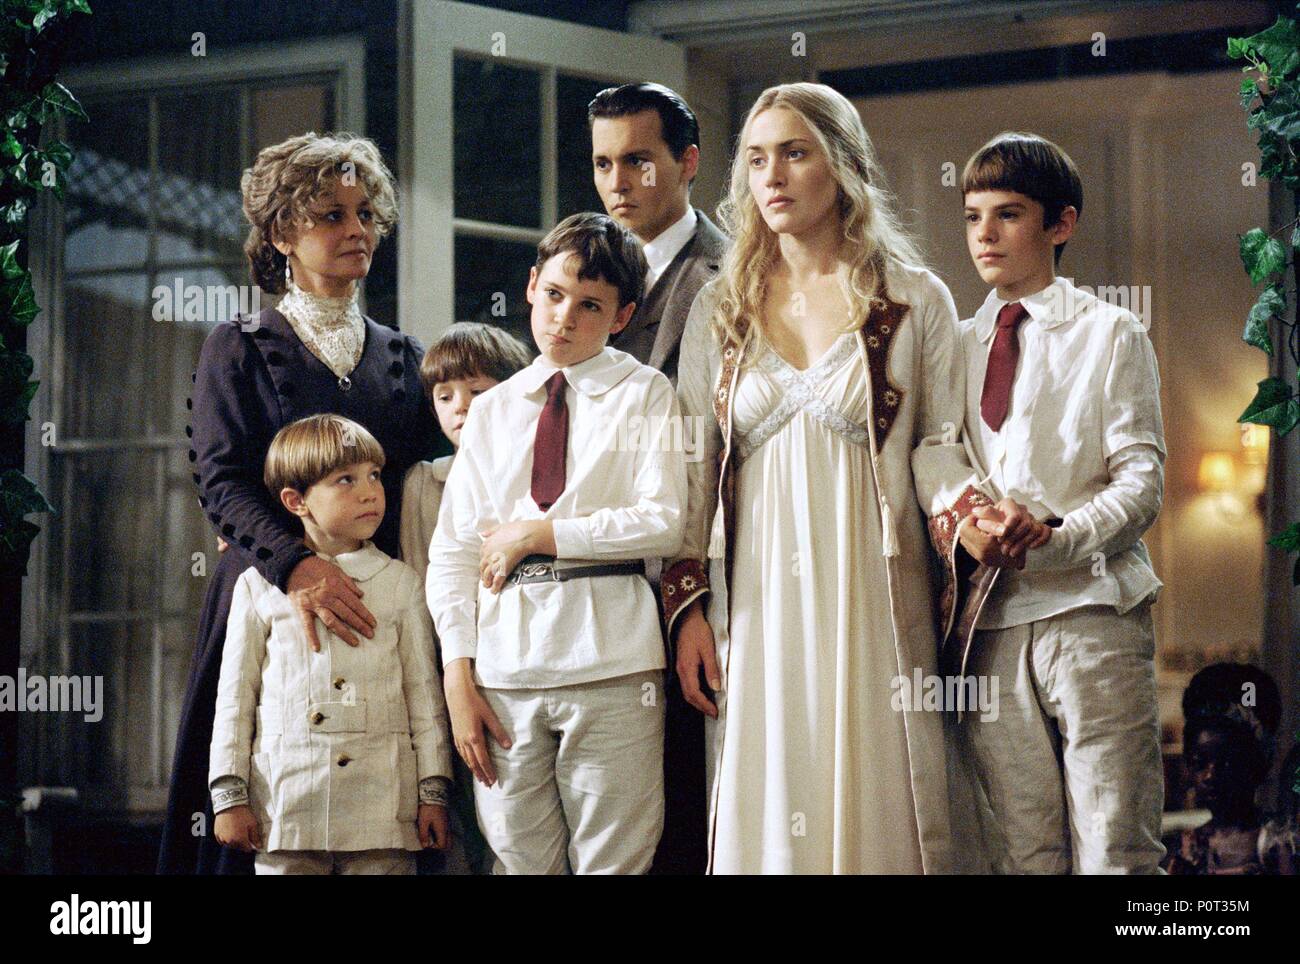 Original Film Title: FINDING NEVERLAND.  English Title: FINDING NEVERLAND.  Film Director: MARC FORSTER.  Year: 2004.  Stars: JOHNNY DEPP; KATE WINSLET; FREDDIE HIGHMORE; JOE PROSPERO; NICK ROUD. Copyright: Editorial inside use only. This is a publicly distributed handout. Access rights only, no license of copyright provided. Mandatory authorization to Visual Icon (www.visual-icon.com) is required for the reproduction of this image. Credit: MIRAMAX / Album Stock Photo